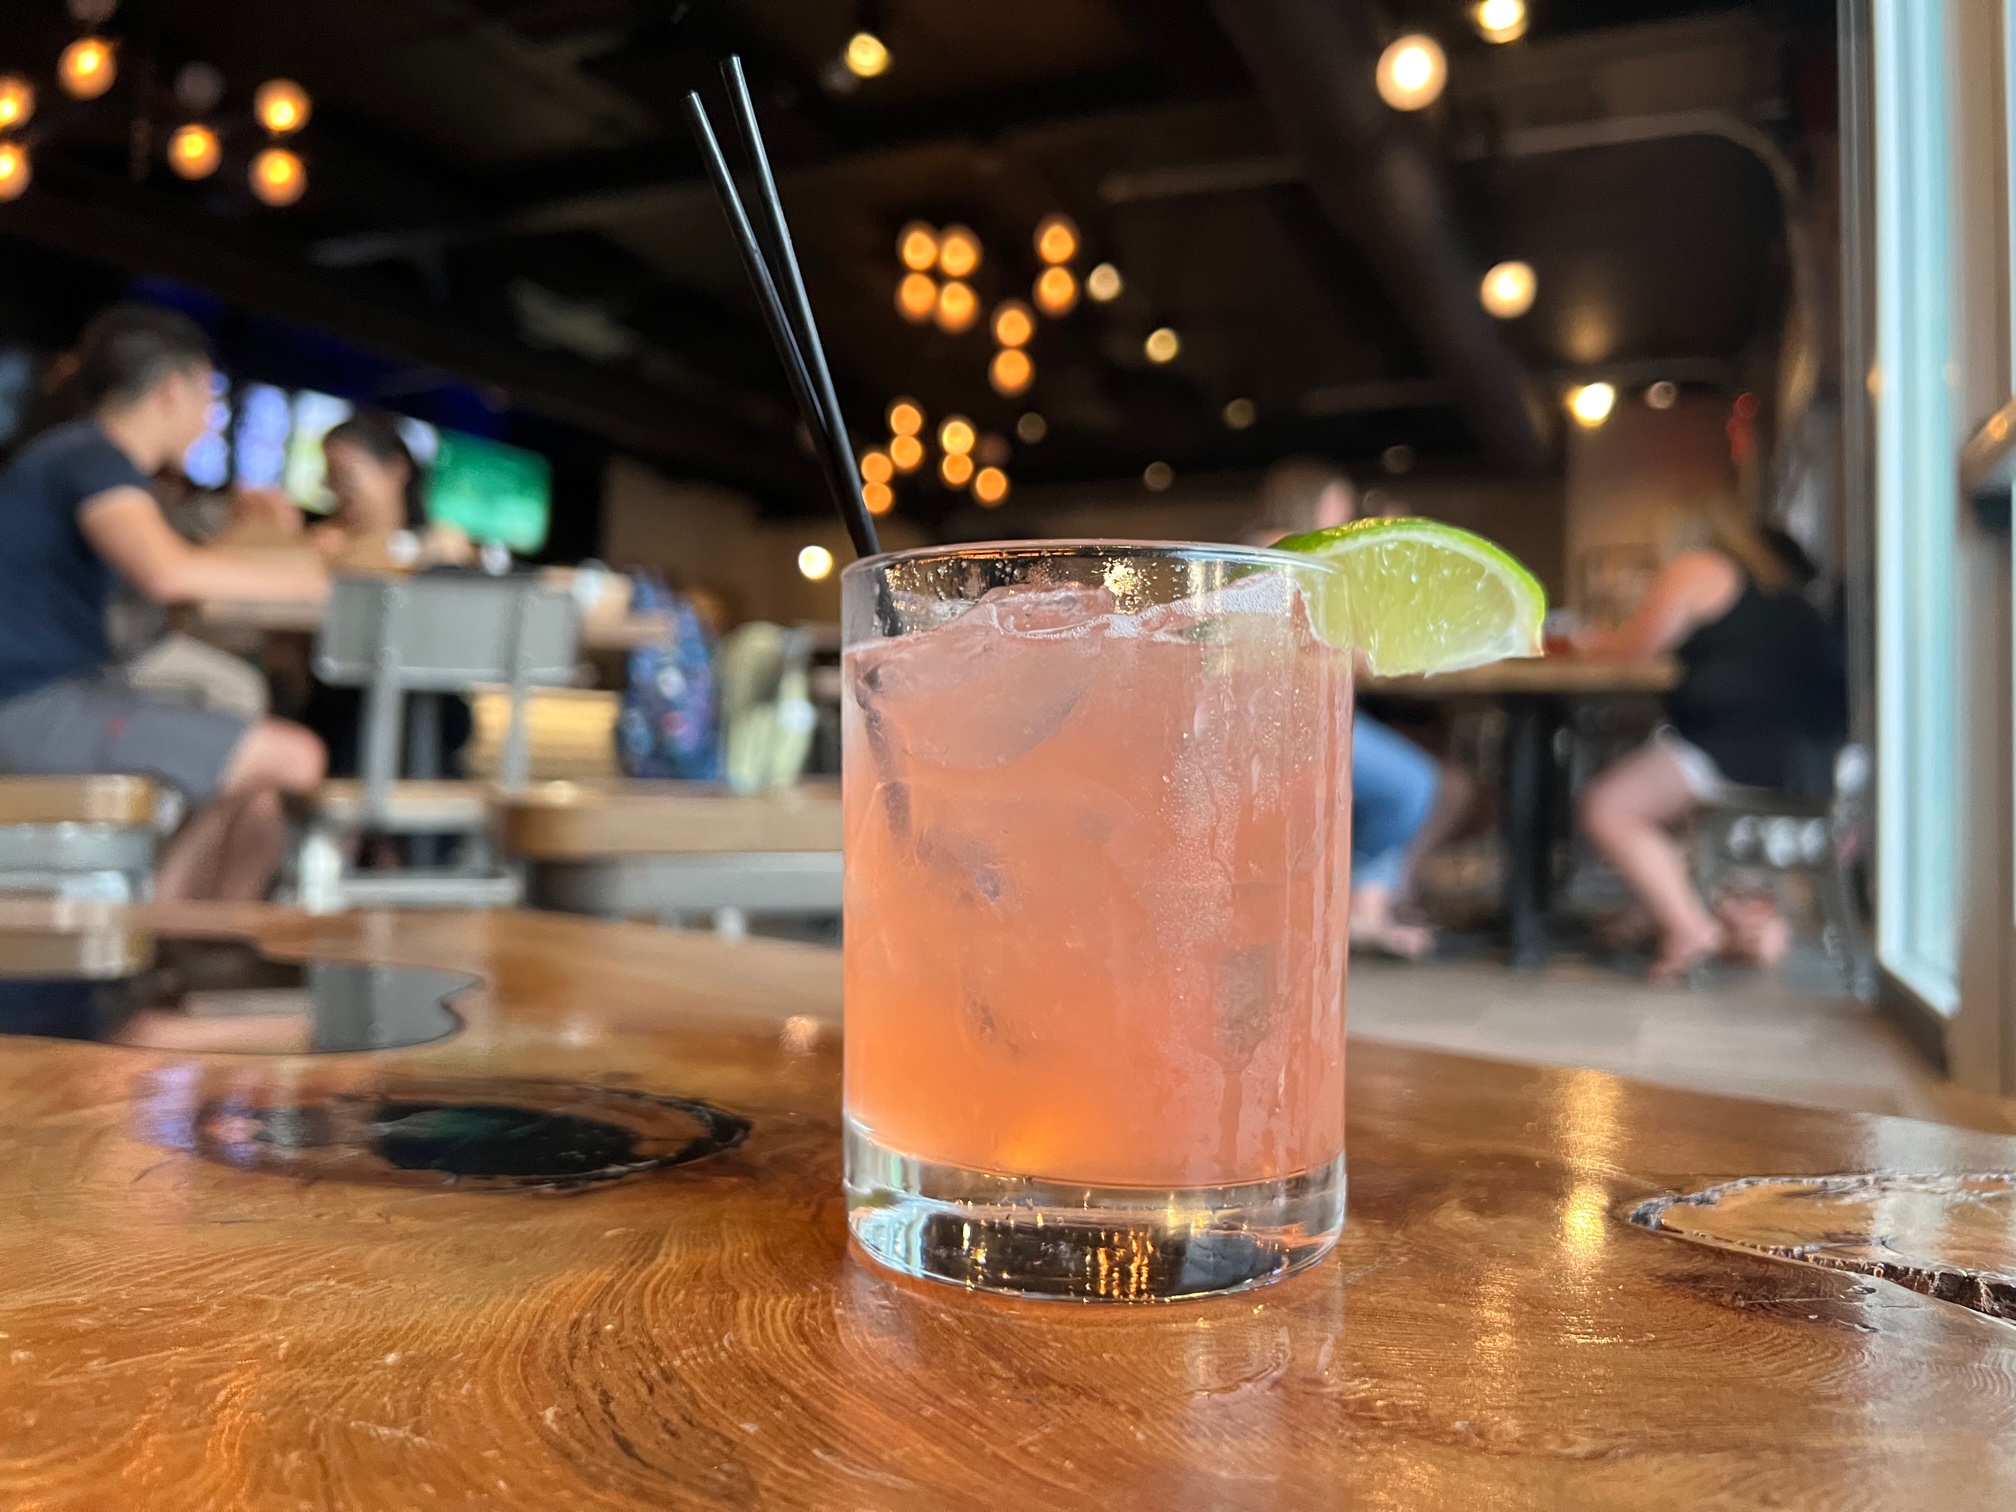 On a wooden table at Collective Pour, a strawberry margarita in a half tumbler is in focus while the other patrons and the lights of the bar are blurred. Photo by Alyssa Buckley.